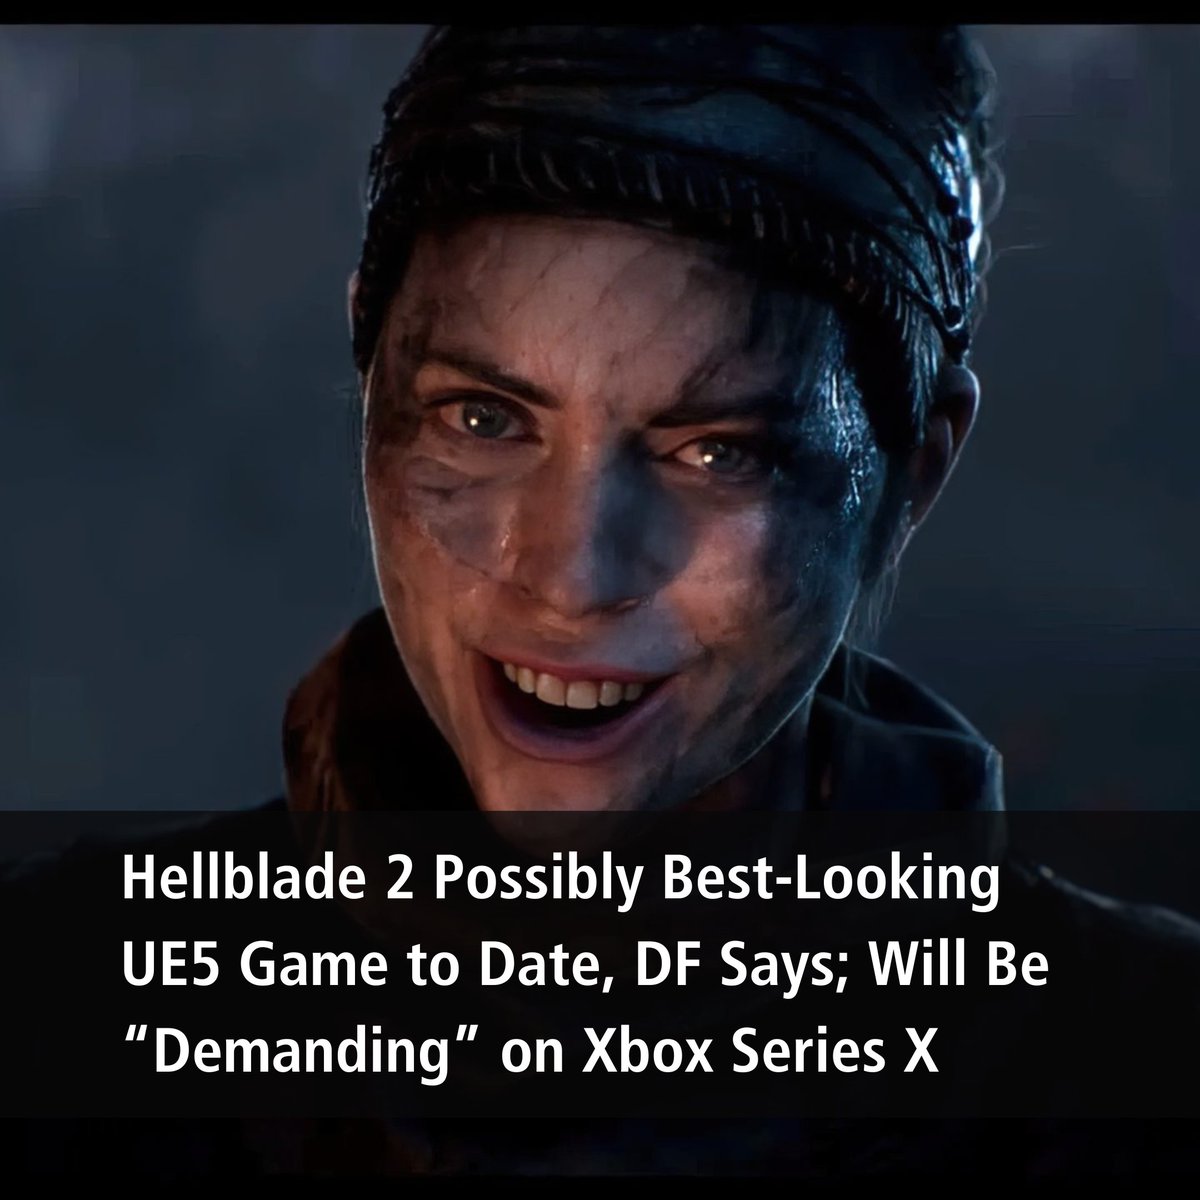 Ninja Theory's upcoming Hellblade 2 might very well be the best-looking Unreal Engine 5 title to date, although it will ask a lot from the Xbox Series X. wccftech.com/hellblade-2-be…